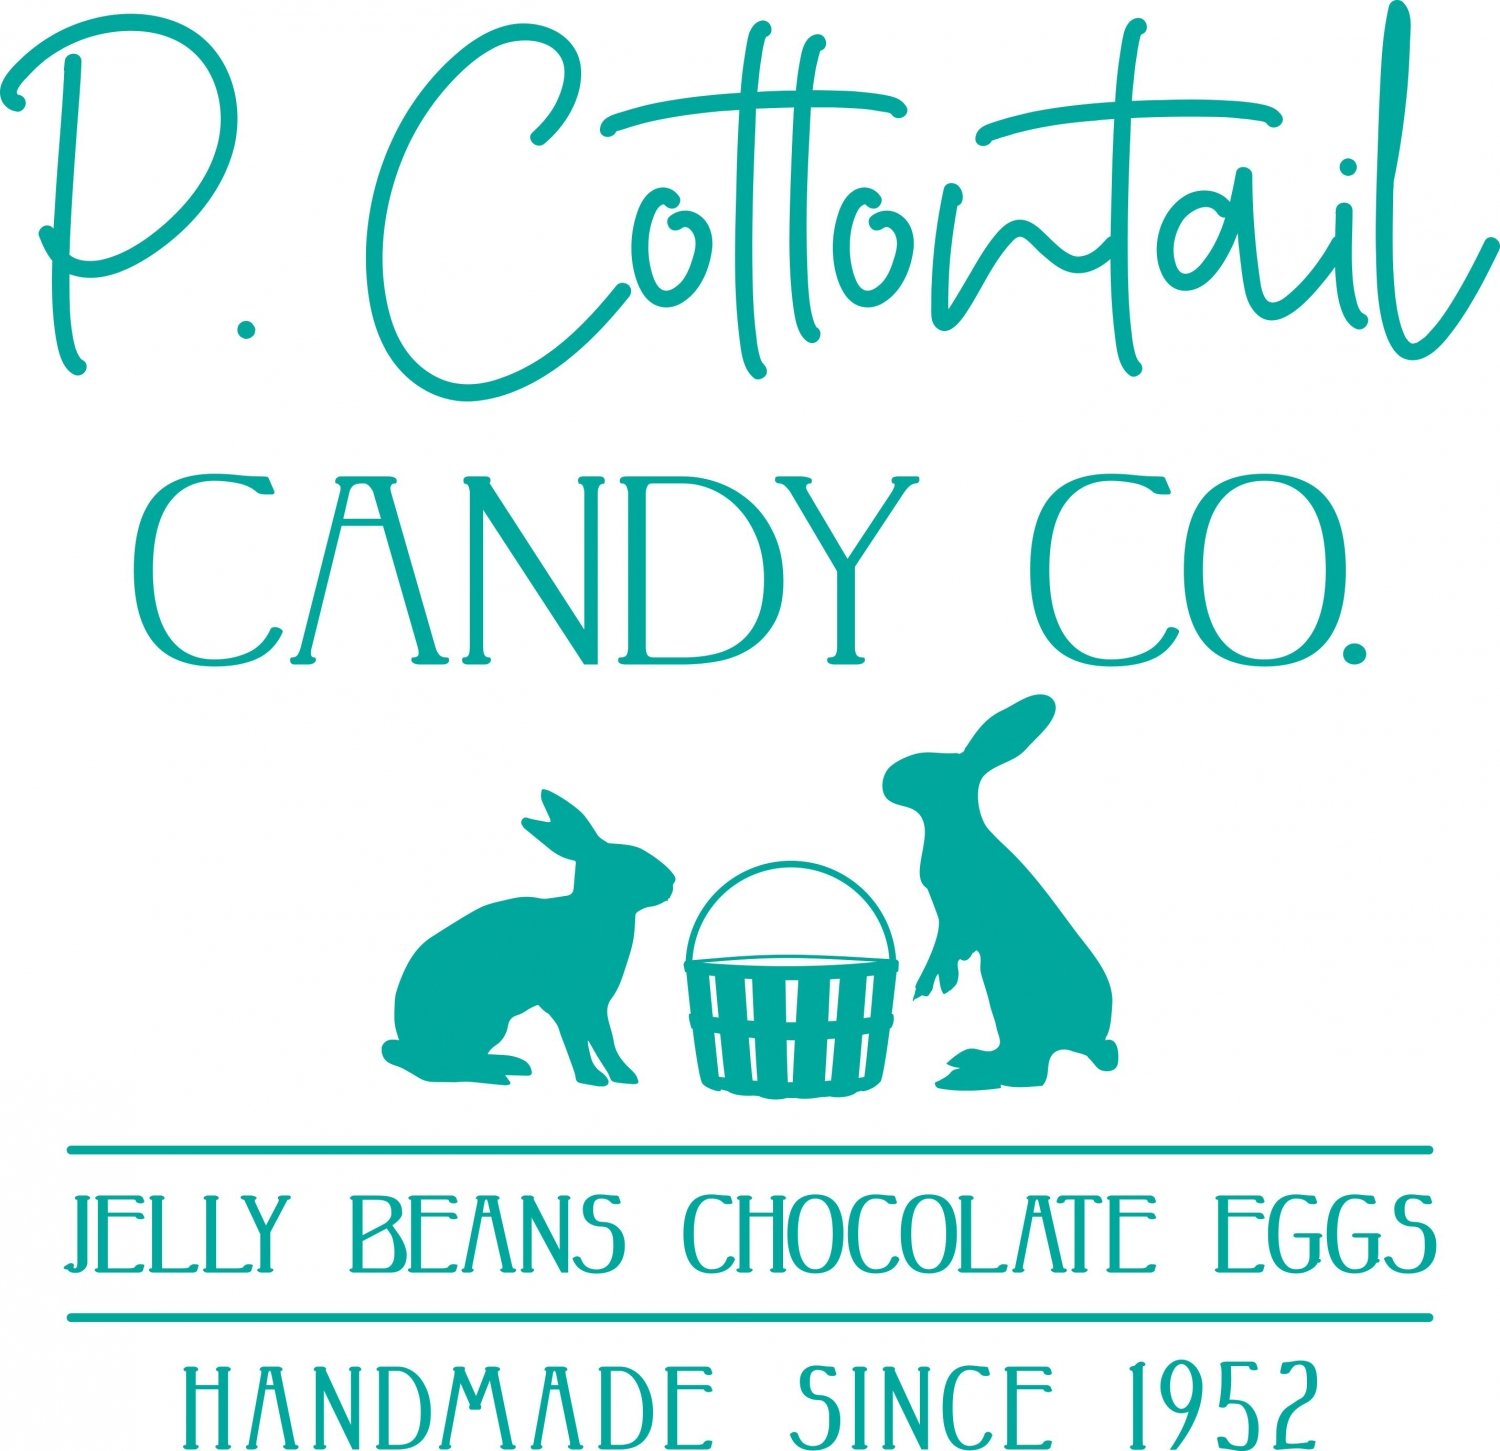 AH265 - PC Cottontail | The Painted Bench Hamilton